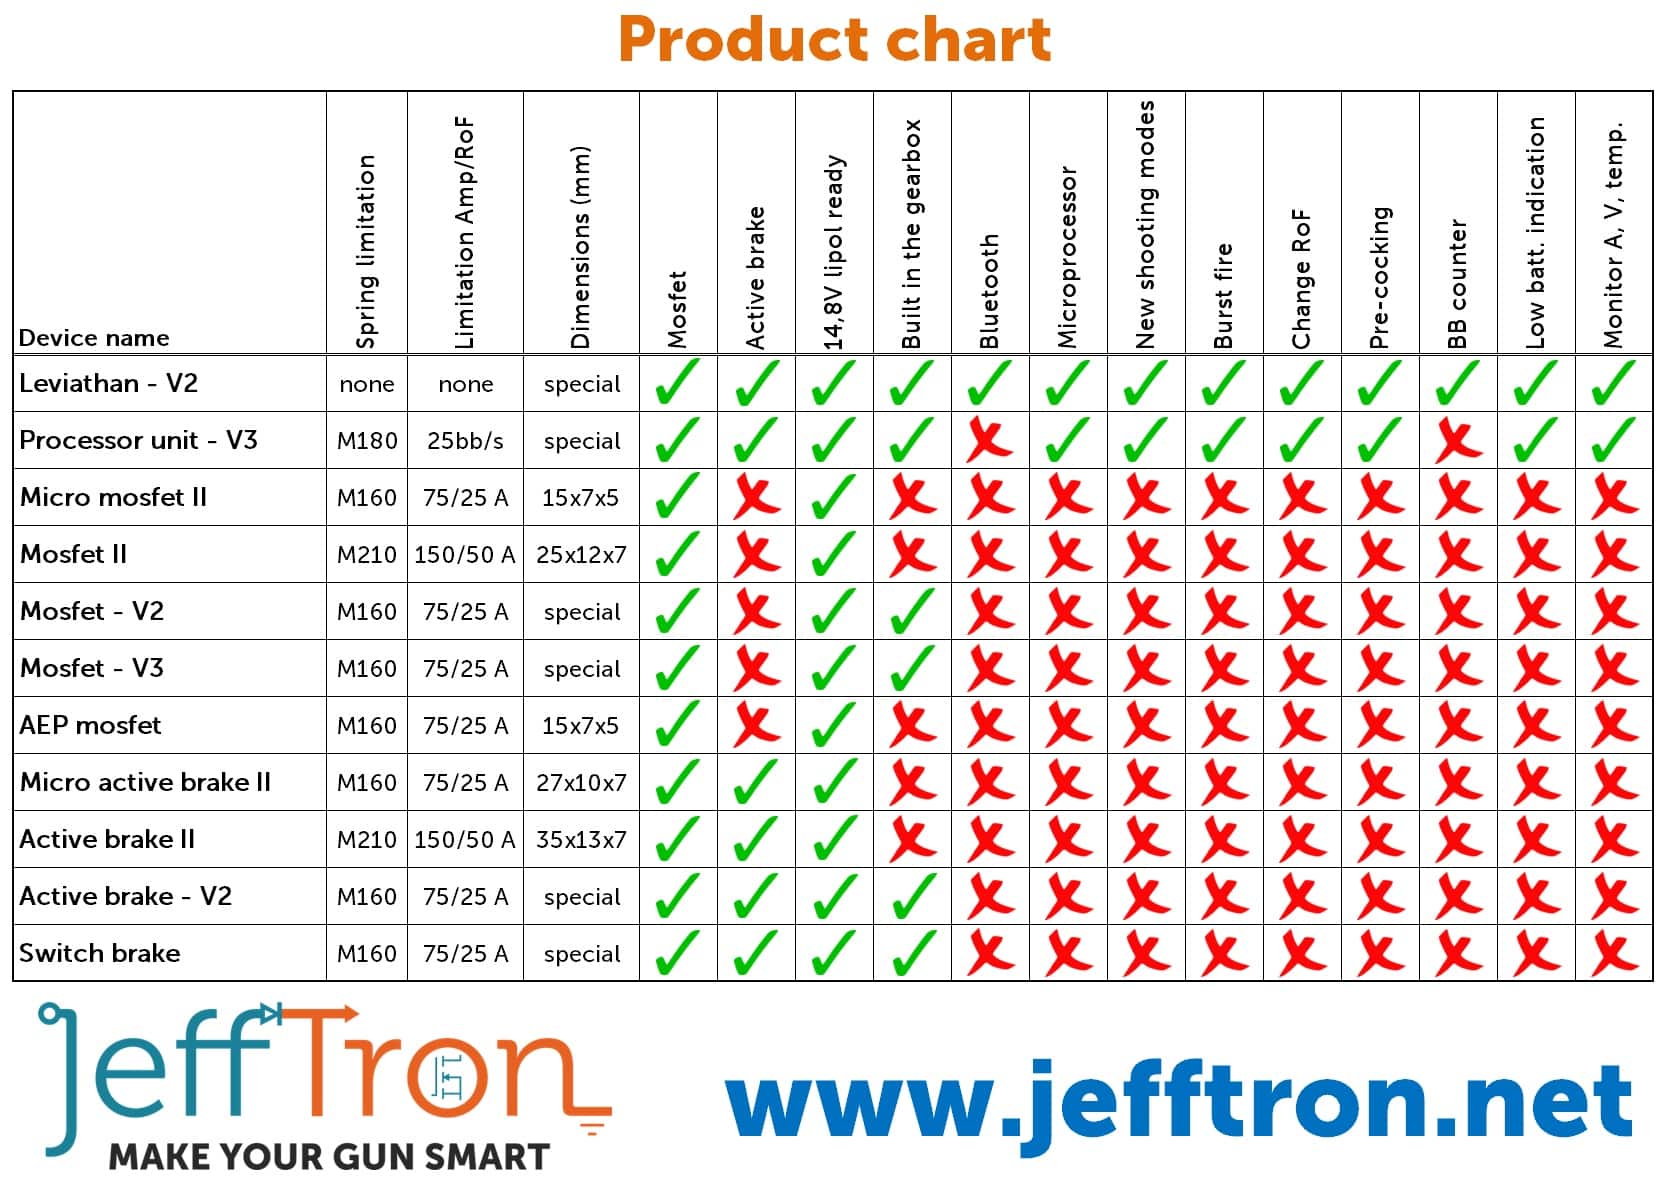 Jefftron Mosfet - V3 above the gearbox